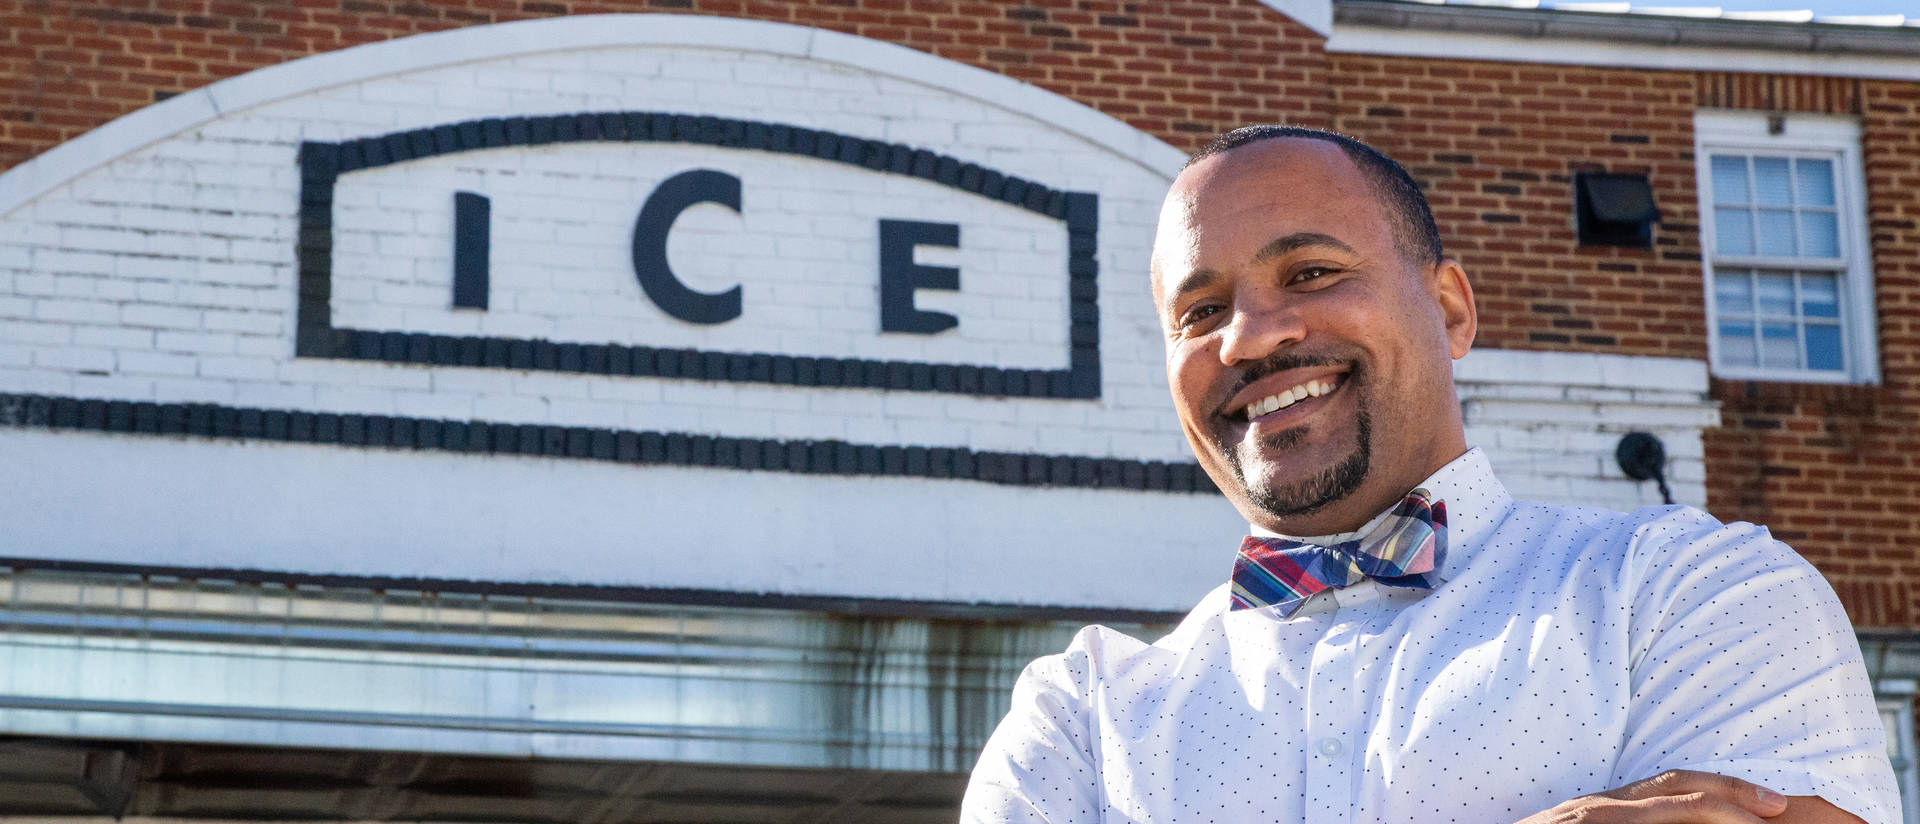 Brandon Byrd, who launched his food truck eight years ago in Washington, D.C., soon will open his first storefront in a historic building in Virginia. (Photo credit: Misha Enriquez for Visit Alexandria)